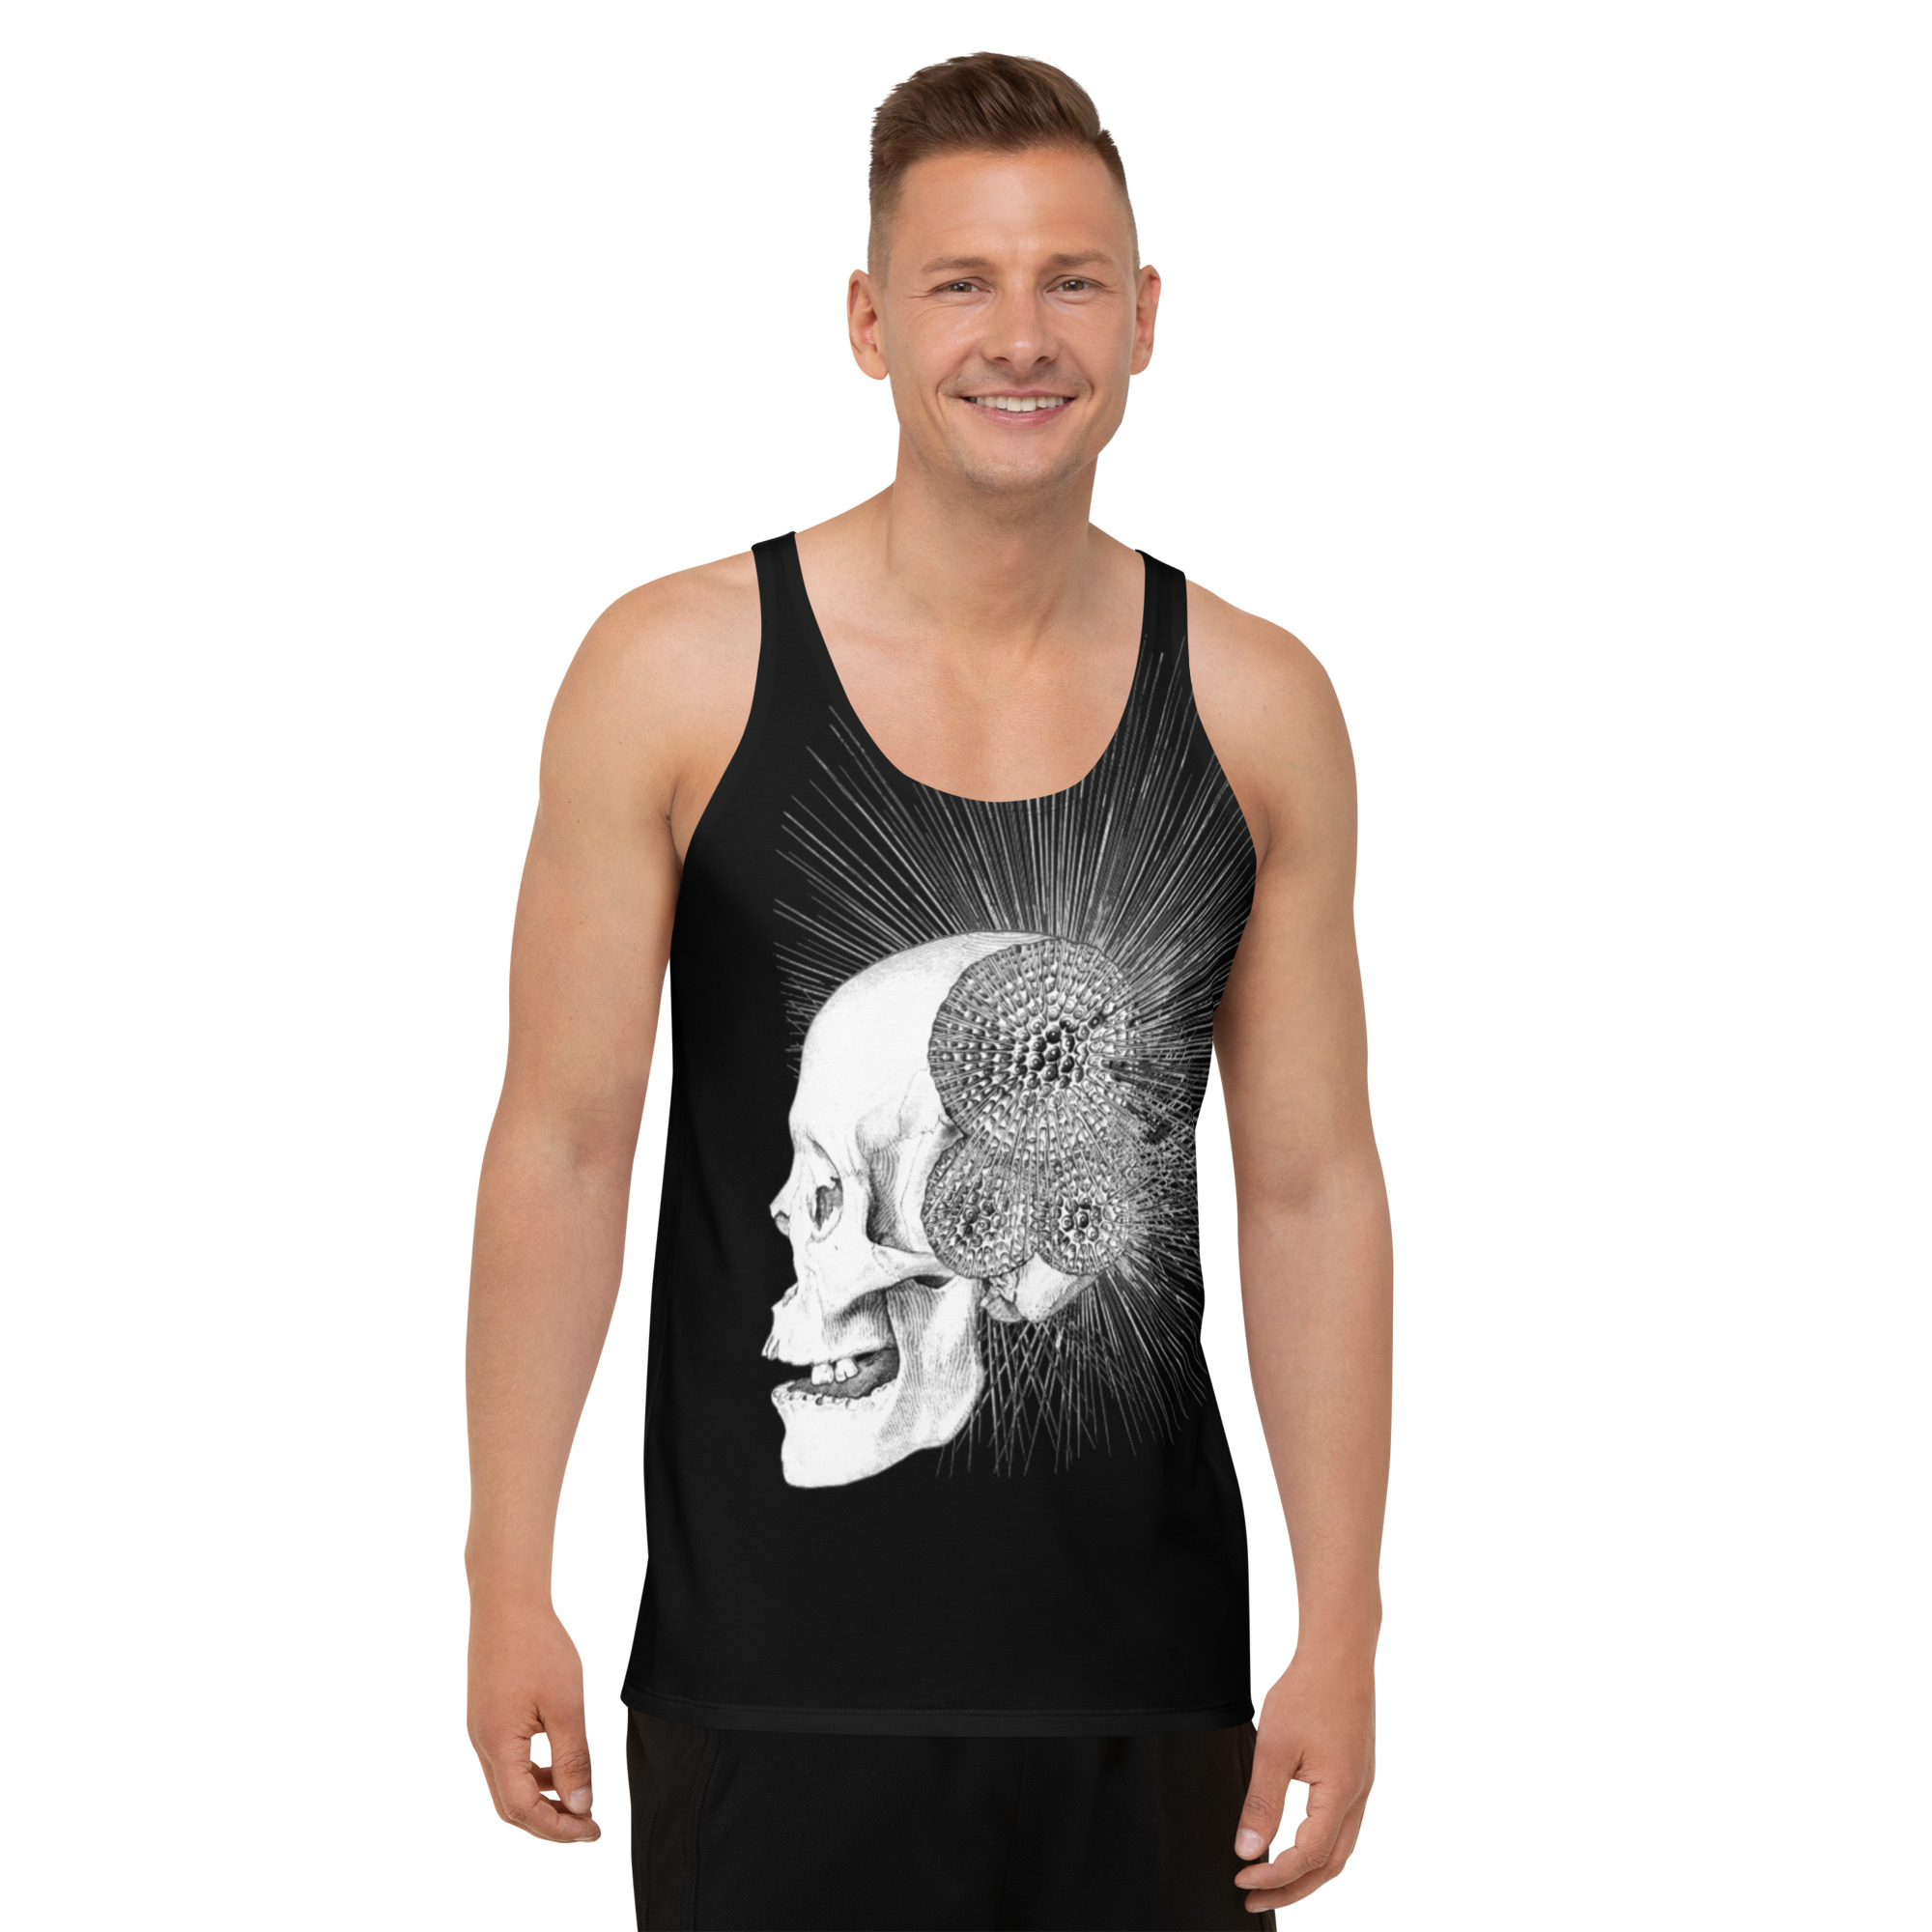 all-over-print-mens-tank-top-white-front-636c3aec29eed.jpg